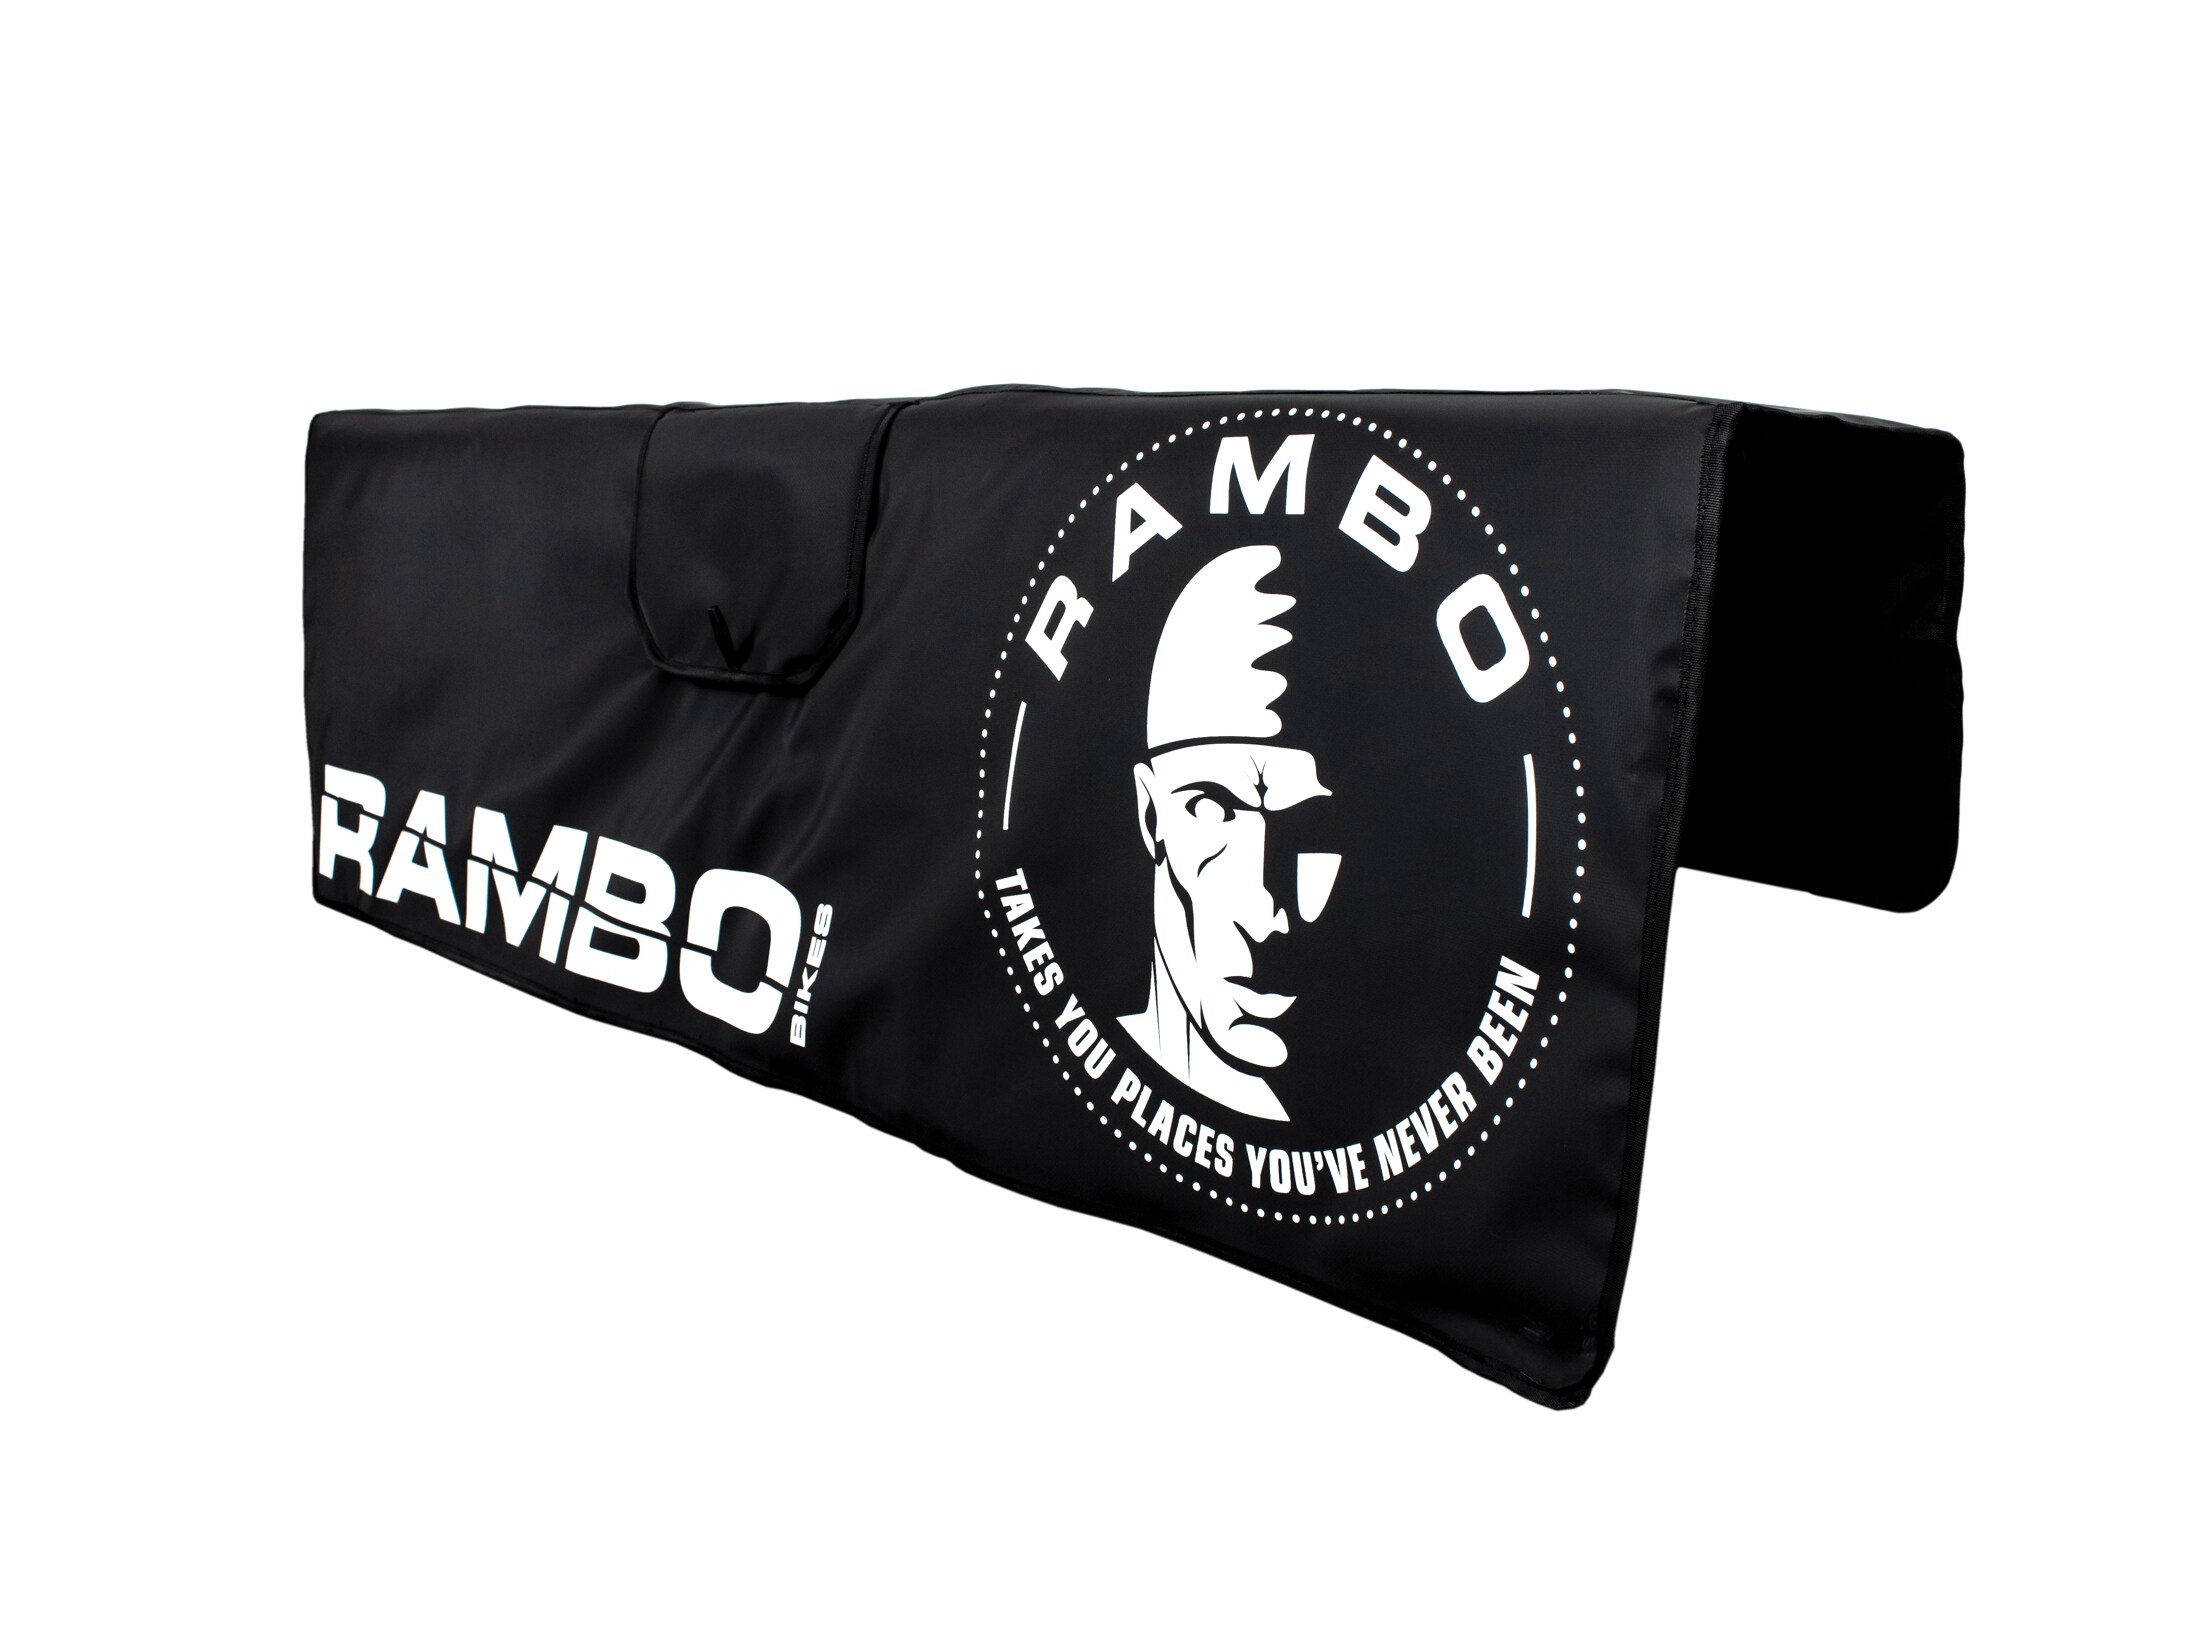 Rambo Bikes Tailgate Cover For Sale